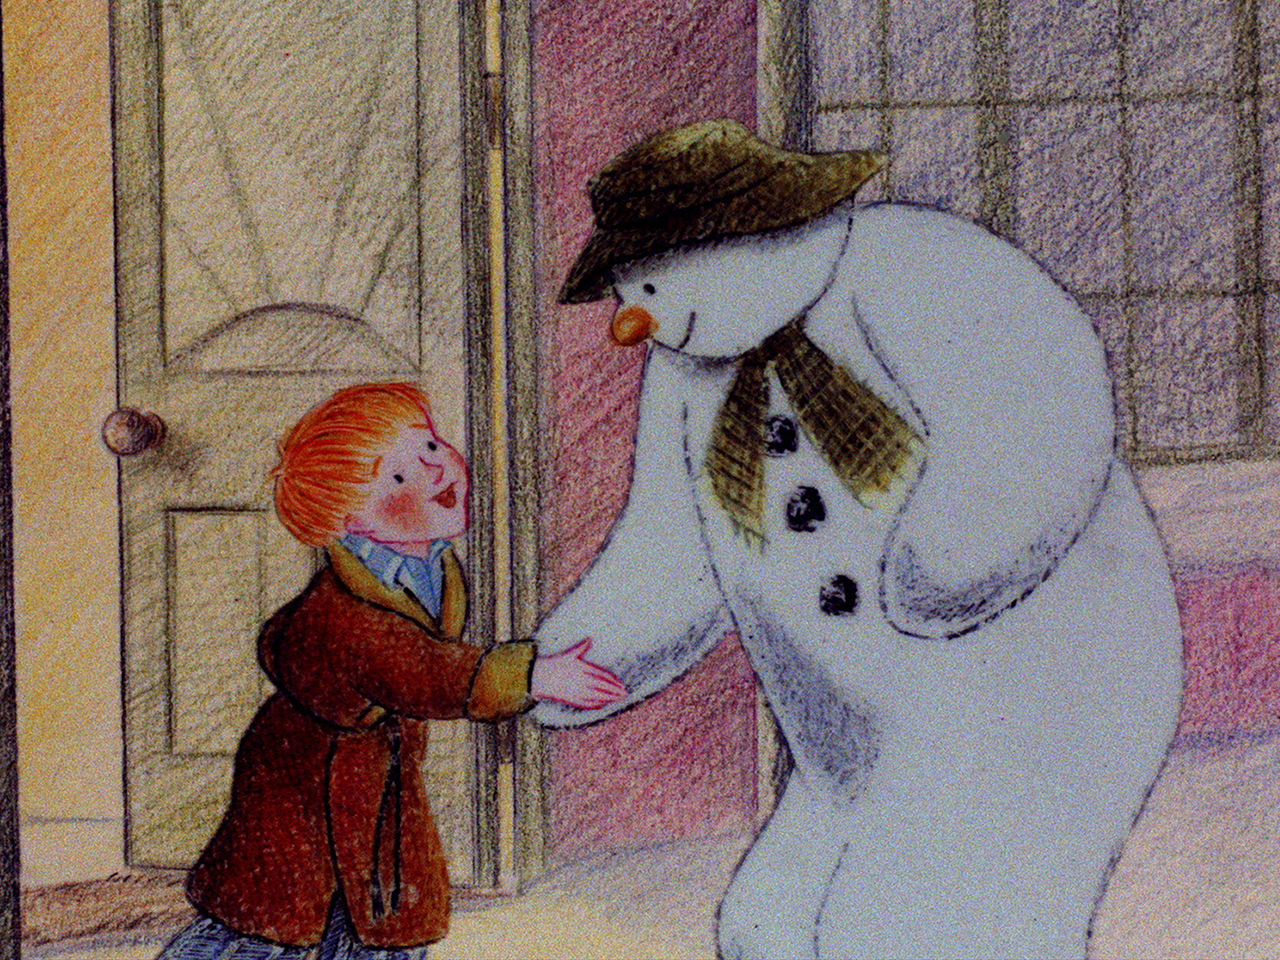 An image of the Snowman and the boy shaking hands, after The Snowman film wins Best Children's Programme at the BAFTA TV Awards